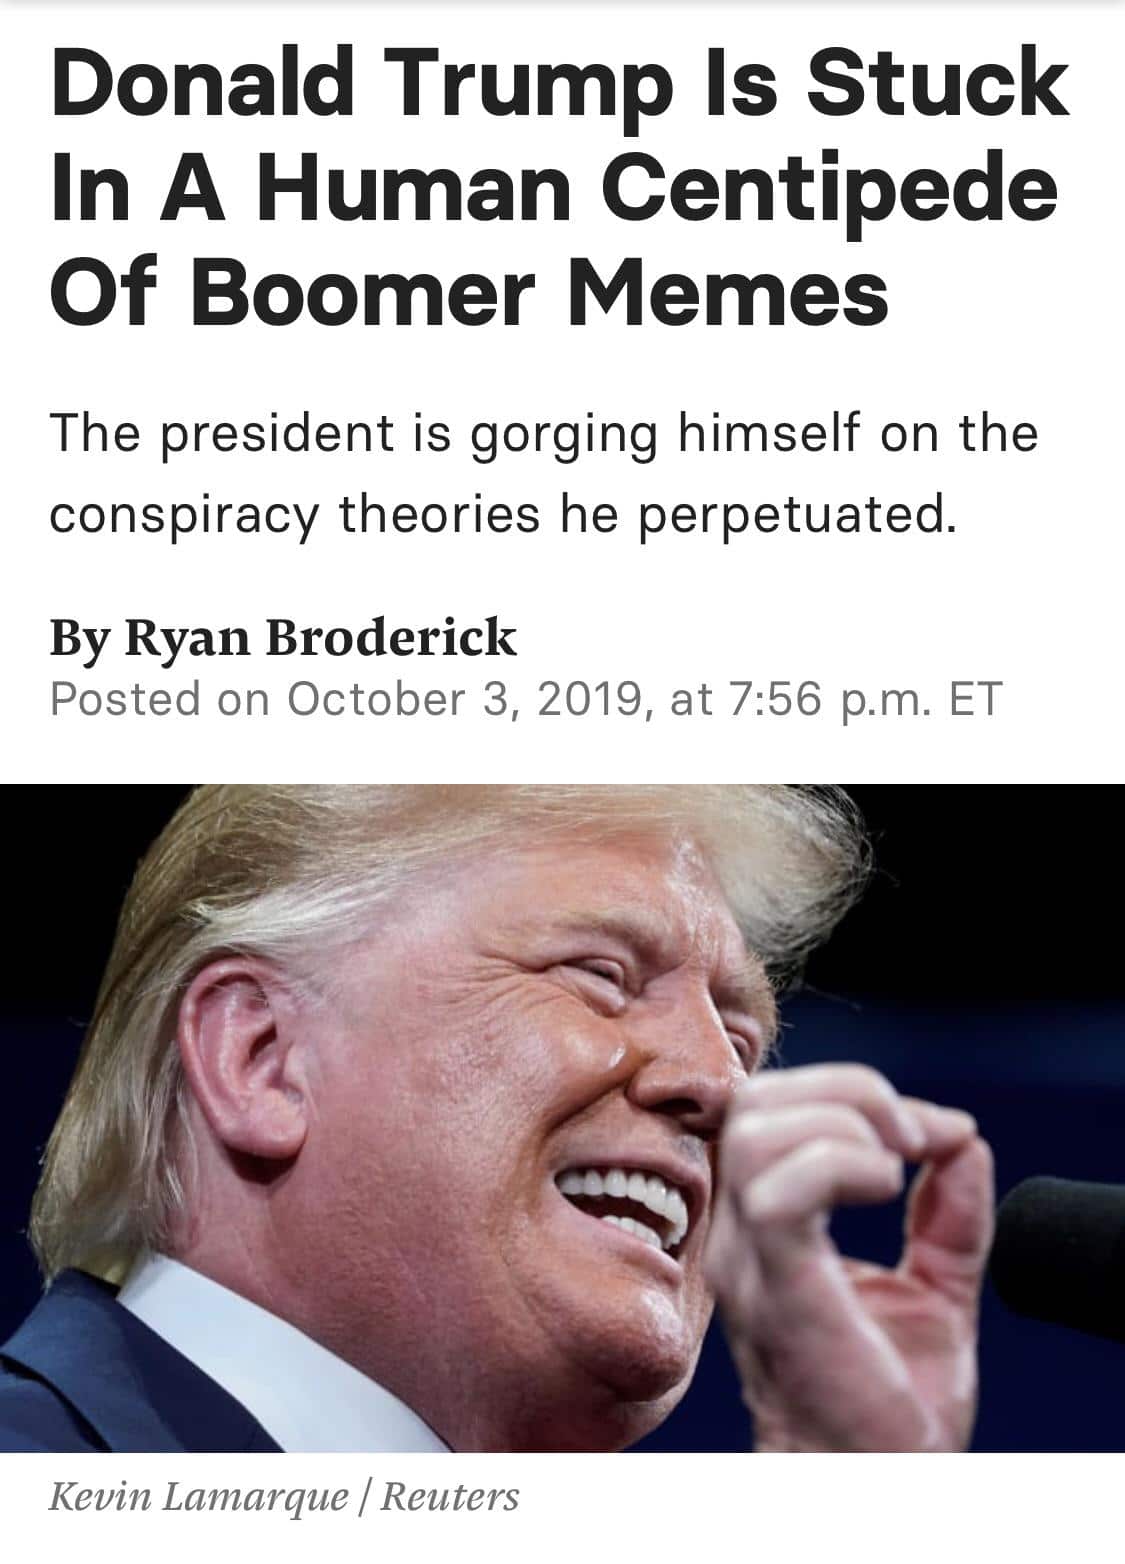 political political-memes political text: Donald Trump Is Stuck In A Human Centipede Of Boomer Memes The president is gorging himself on the conspiracy theories he perpetuated. By Ryan Broderick Posted on October 3, 2019, at 7:56 p.m. ET Kevin Lamarque / Reuters 